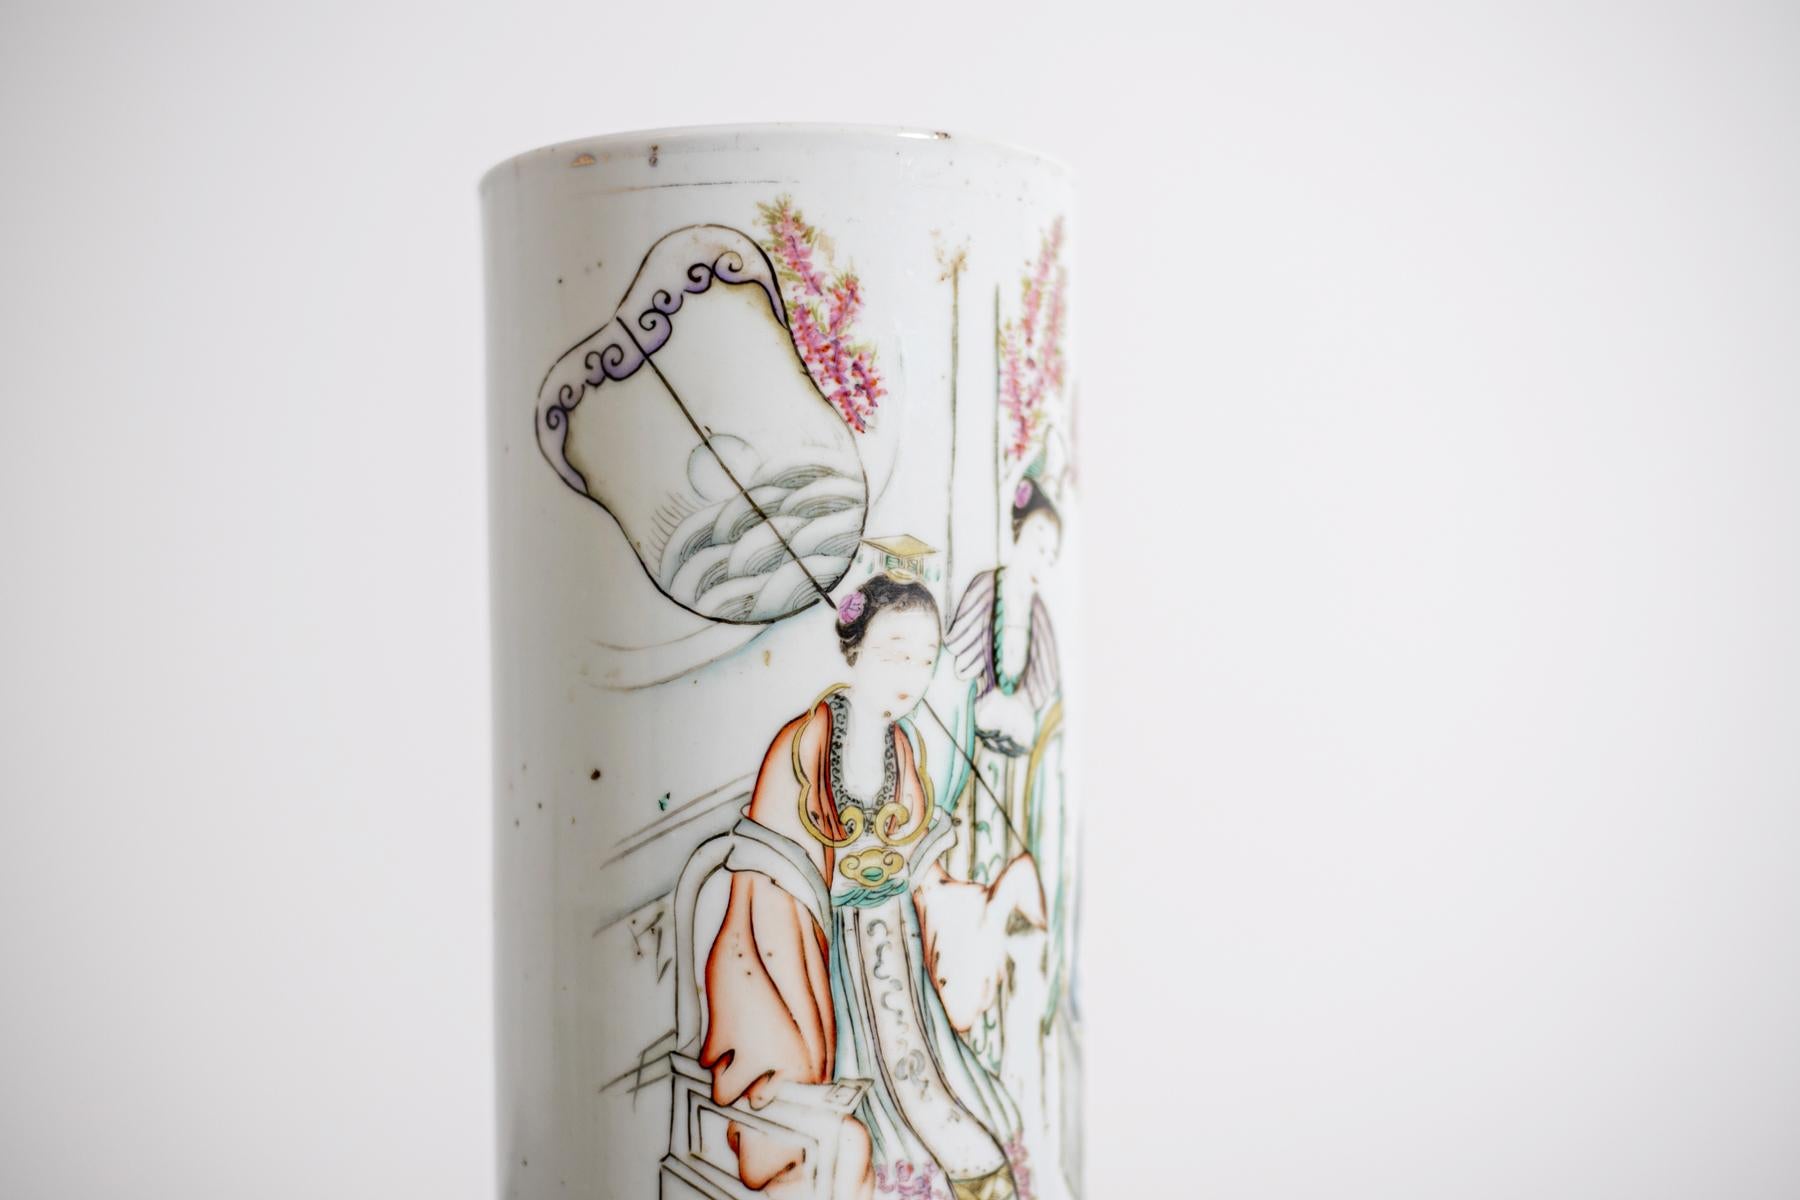 Chinese Export Chinese Porcelain Vase China Attr. Qing Dynasty Guangxu